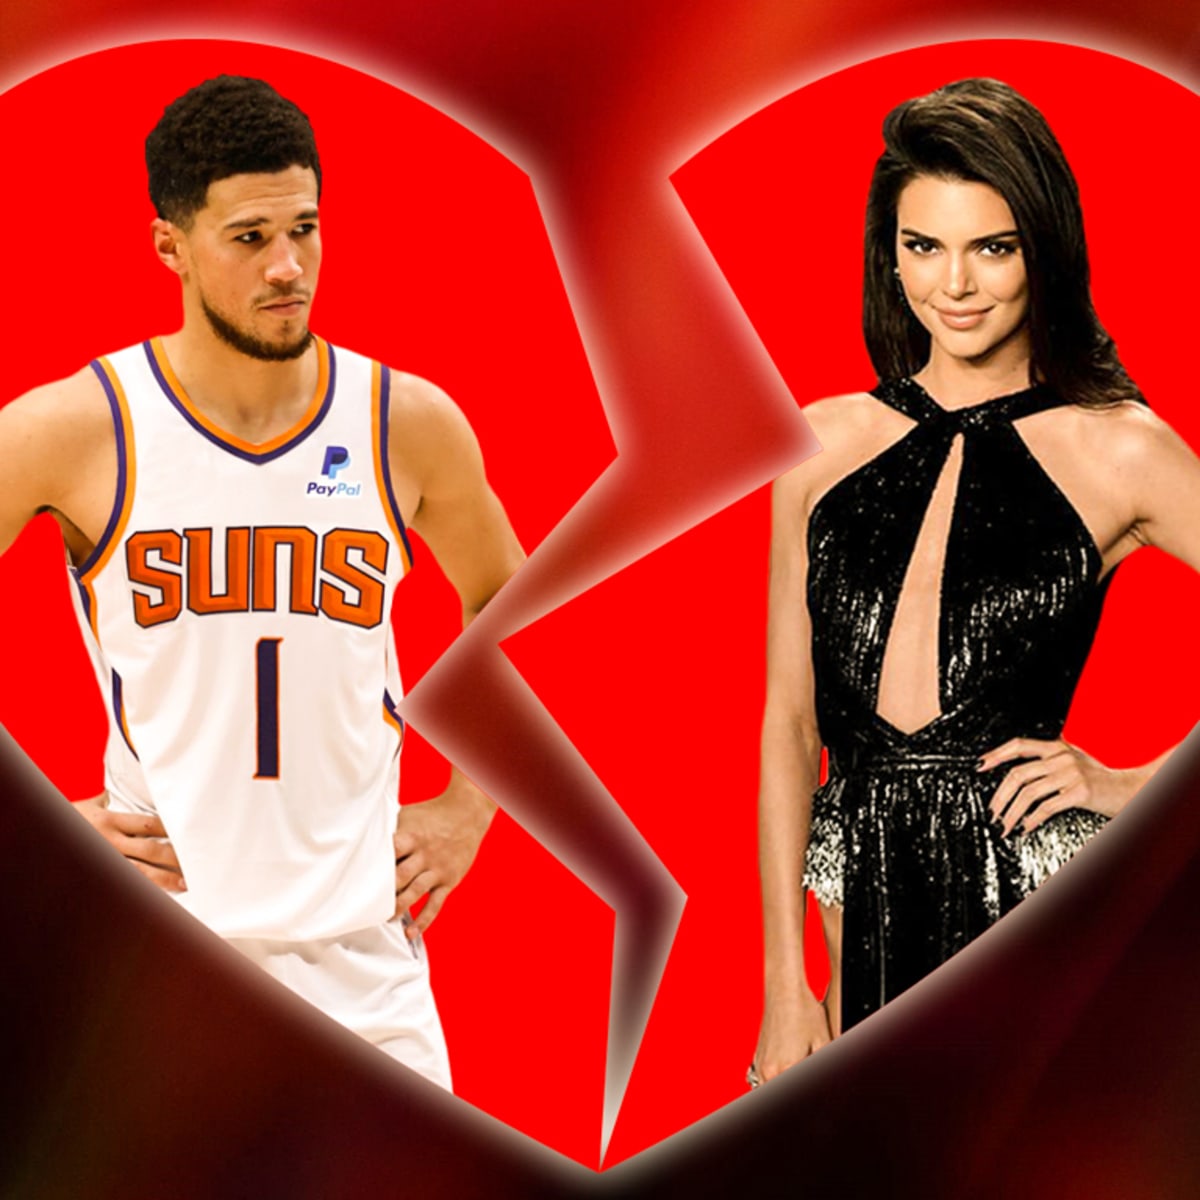 Heartbreak Extended for Devin Booker As Ex-Girlfriend Kendall Jenner Shares  Her Love for Basketball With Rumored Fling Bad Bunny at Lakers vs Warriors  Playoffs Battle - EssentiallySports